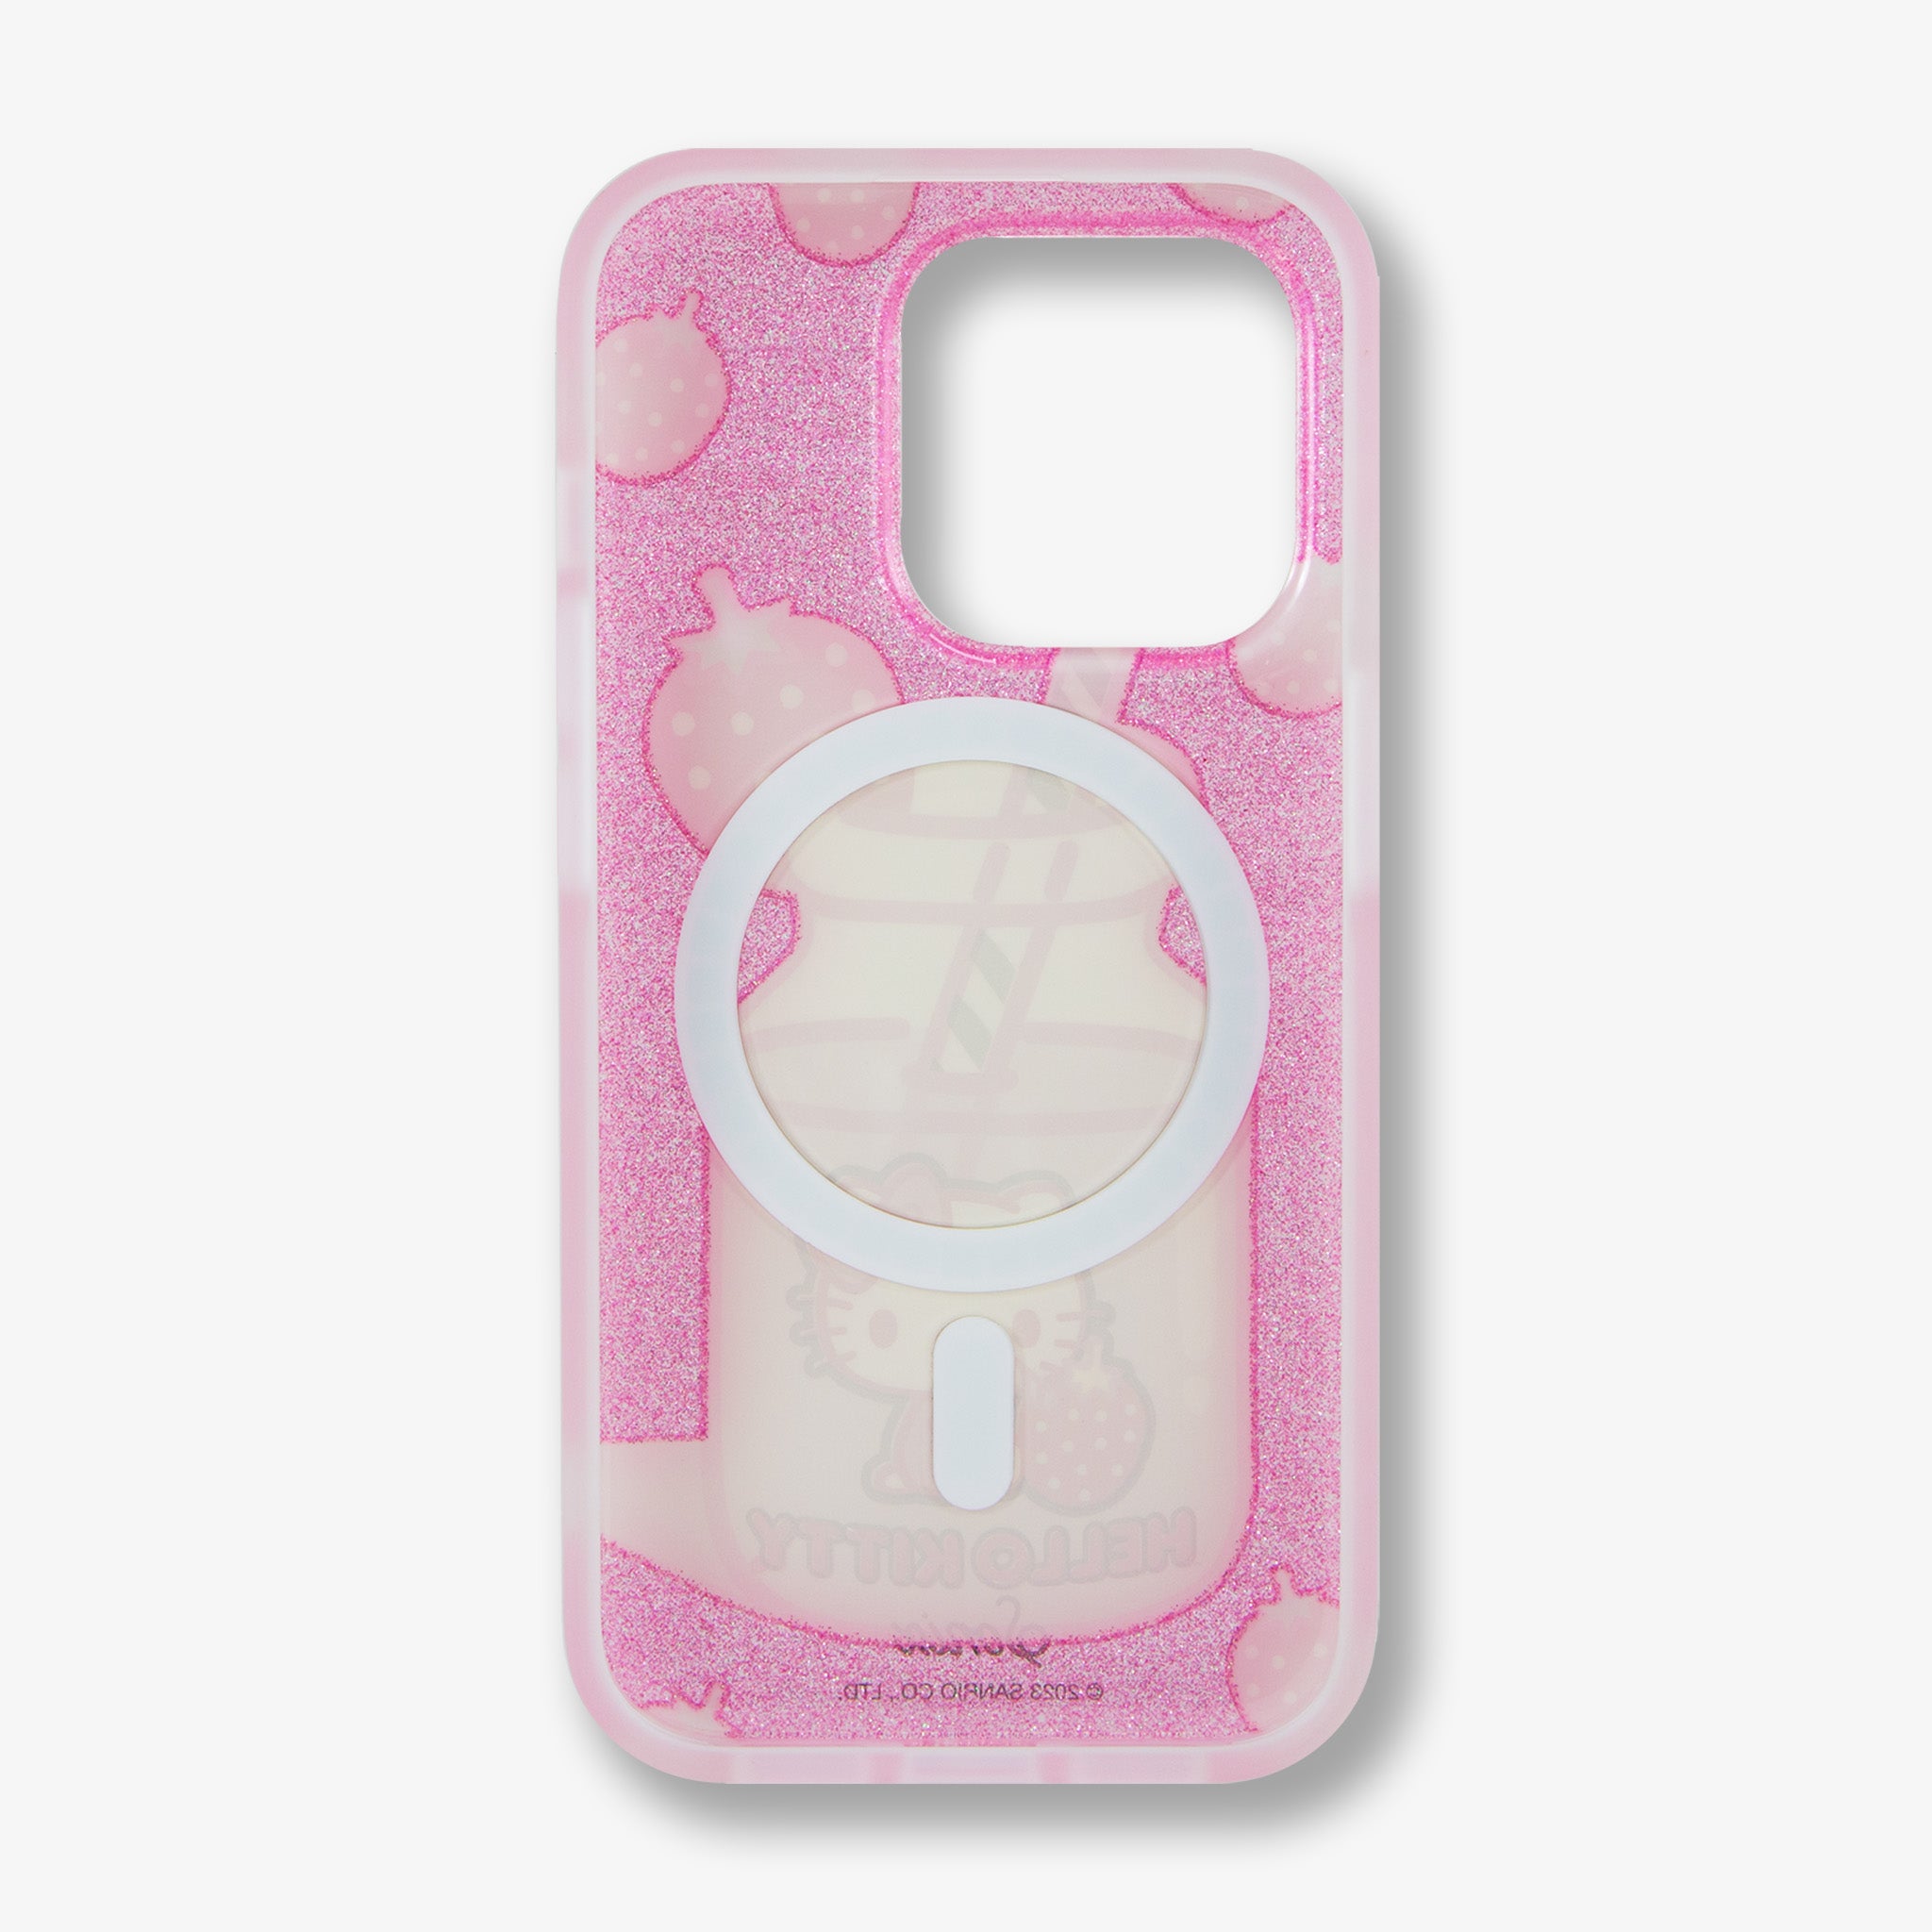 Hello Kitty® Strawberry Milk MagSafe® Compatible iPhone Case